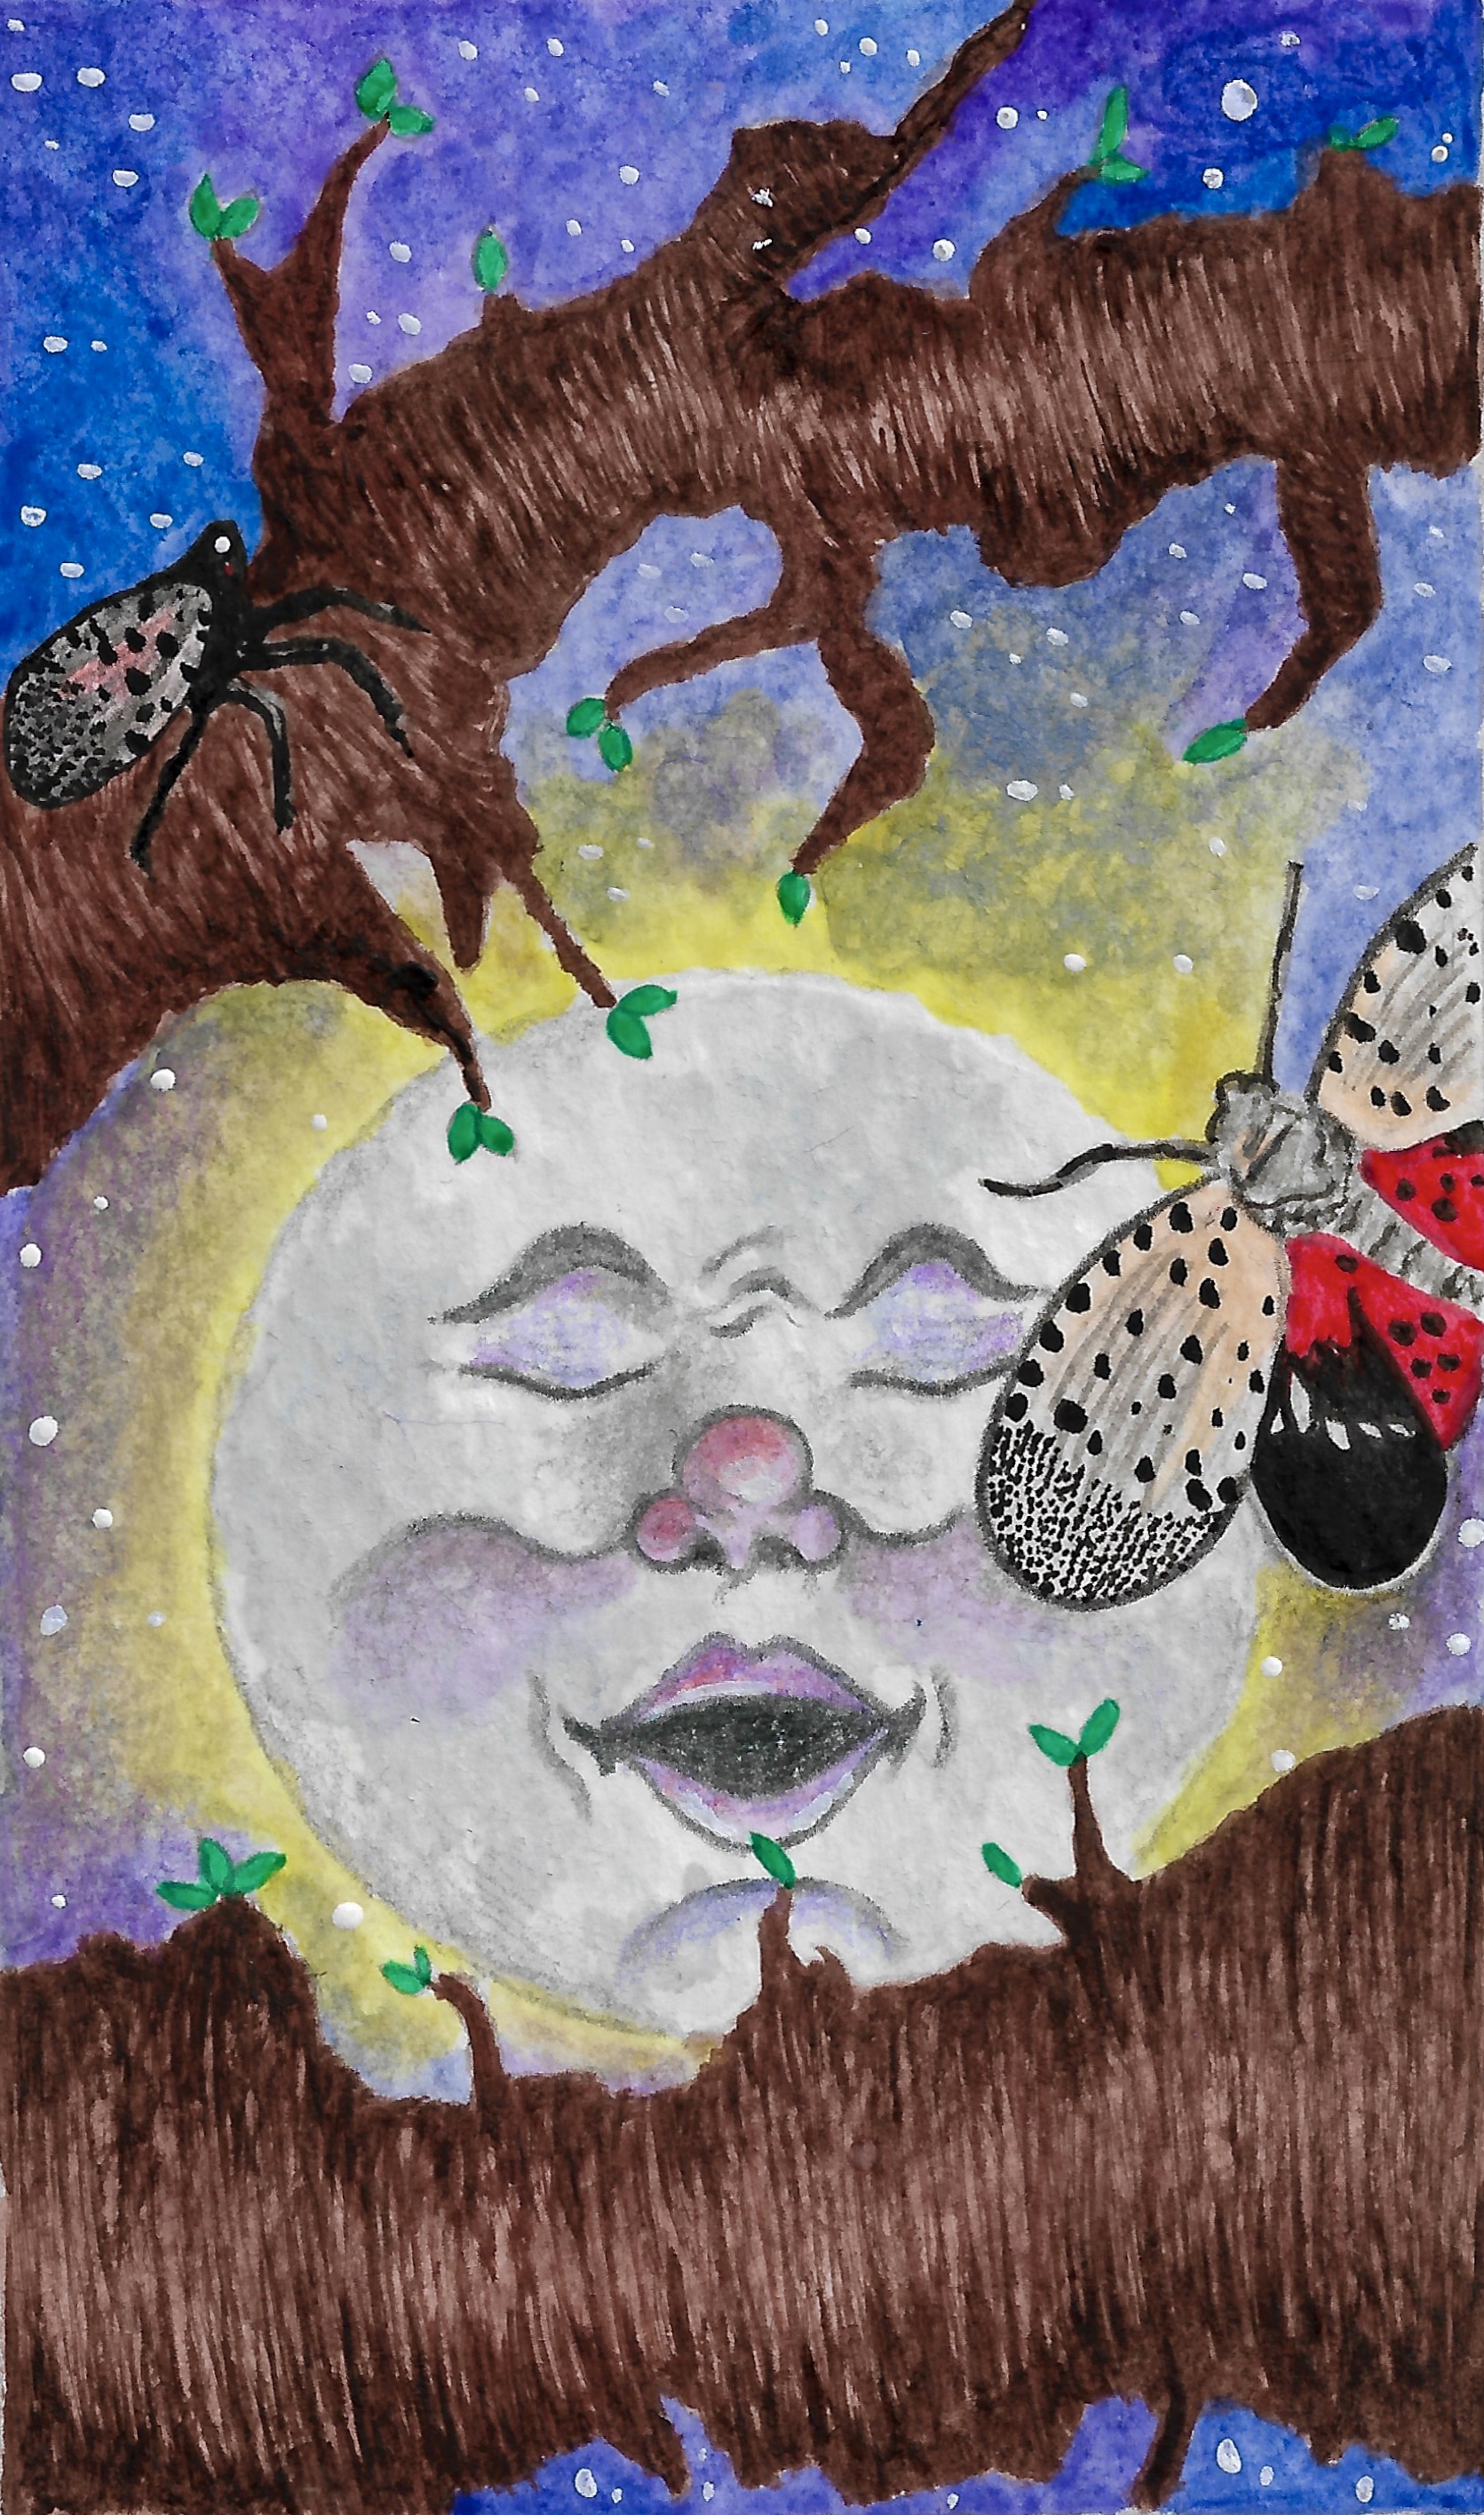 waterpaint/colour pencil illustration of the moon with lanternflies